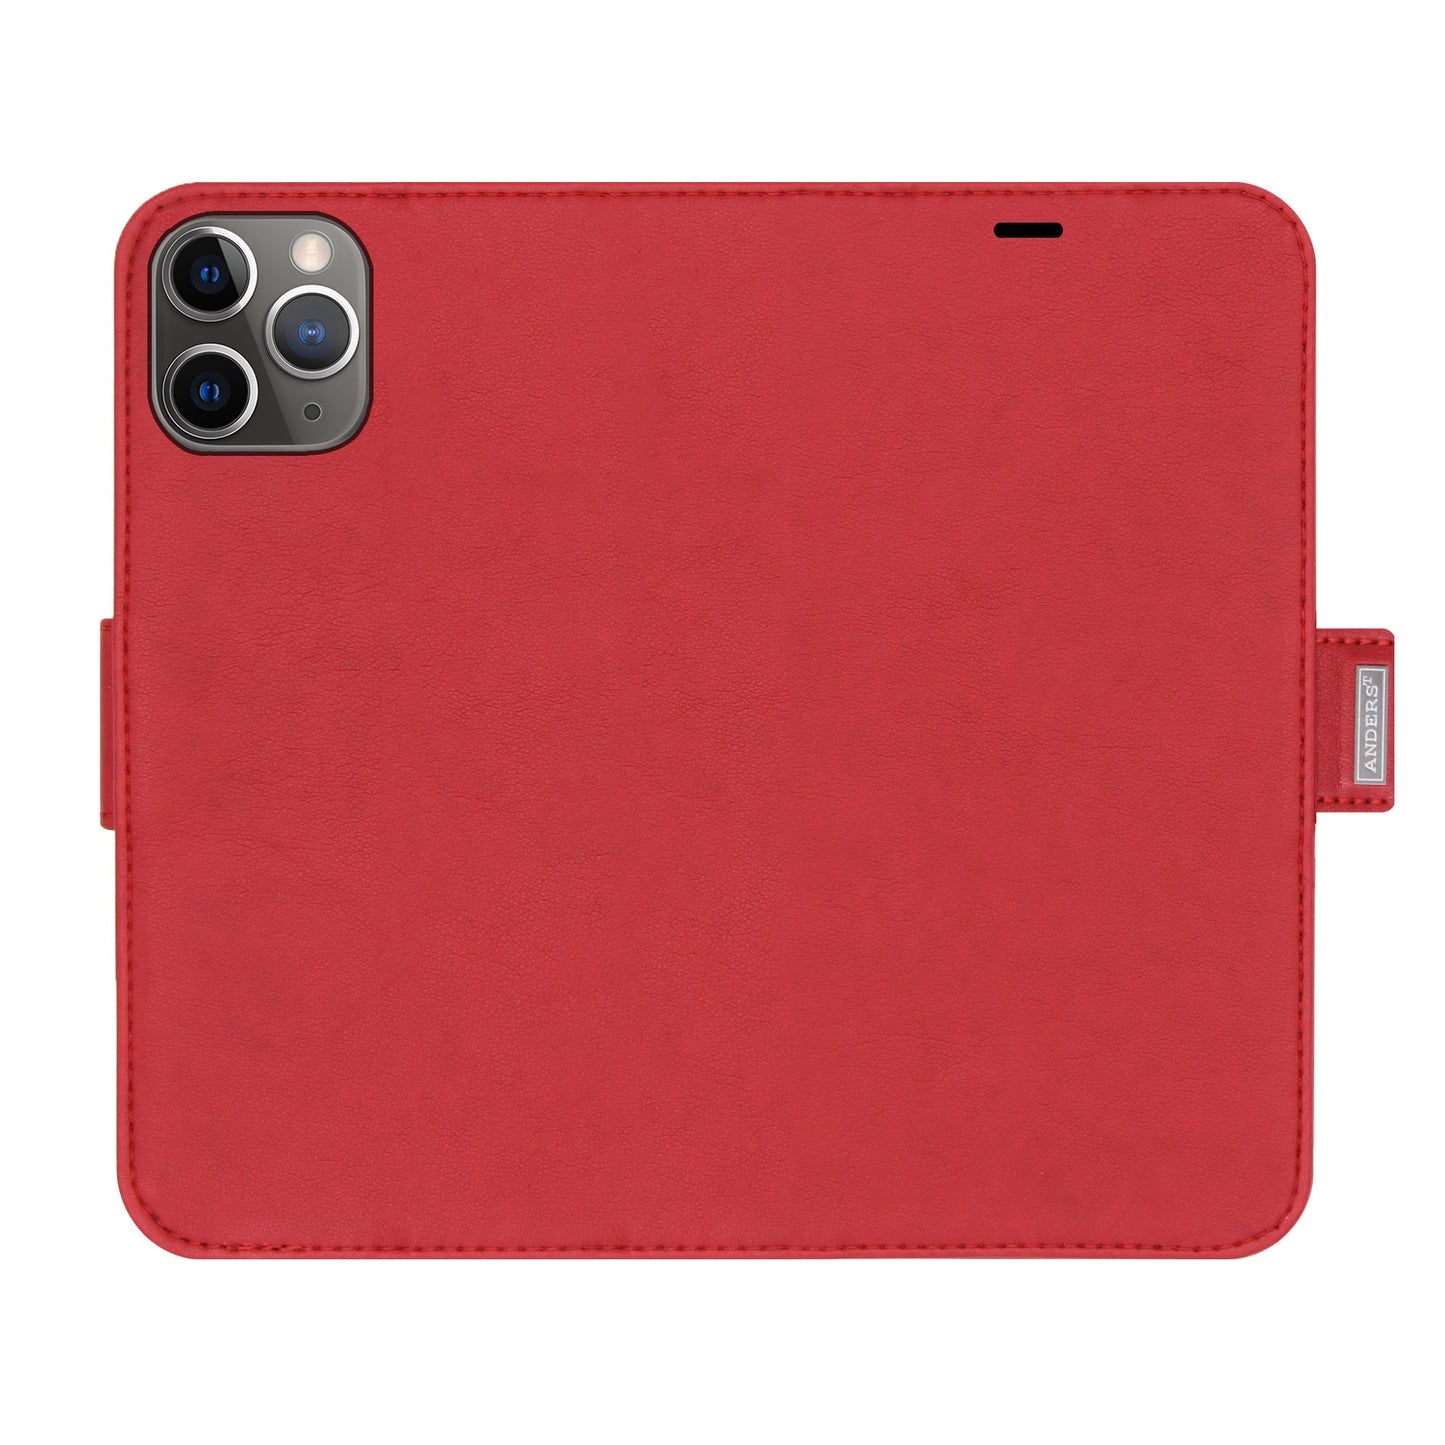 Uni Red Victor Case for iPhone 11 Pro Max